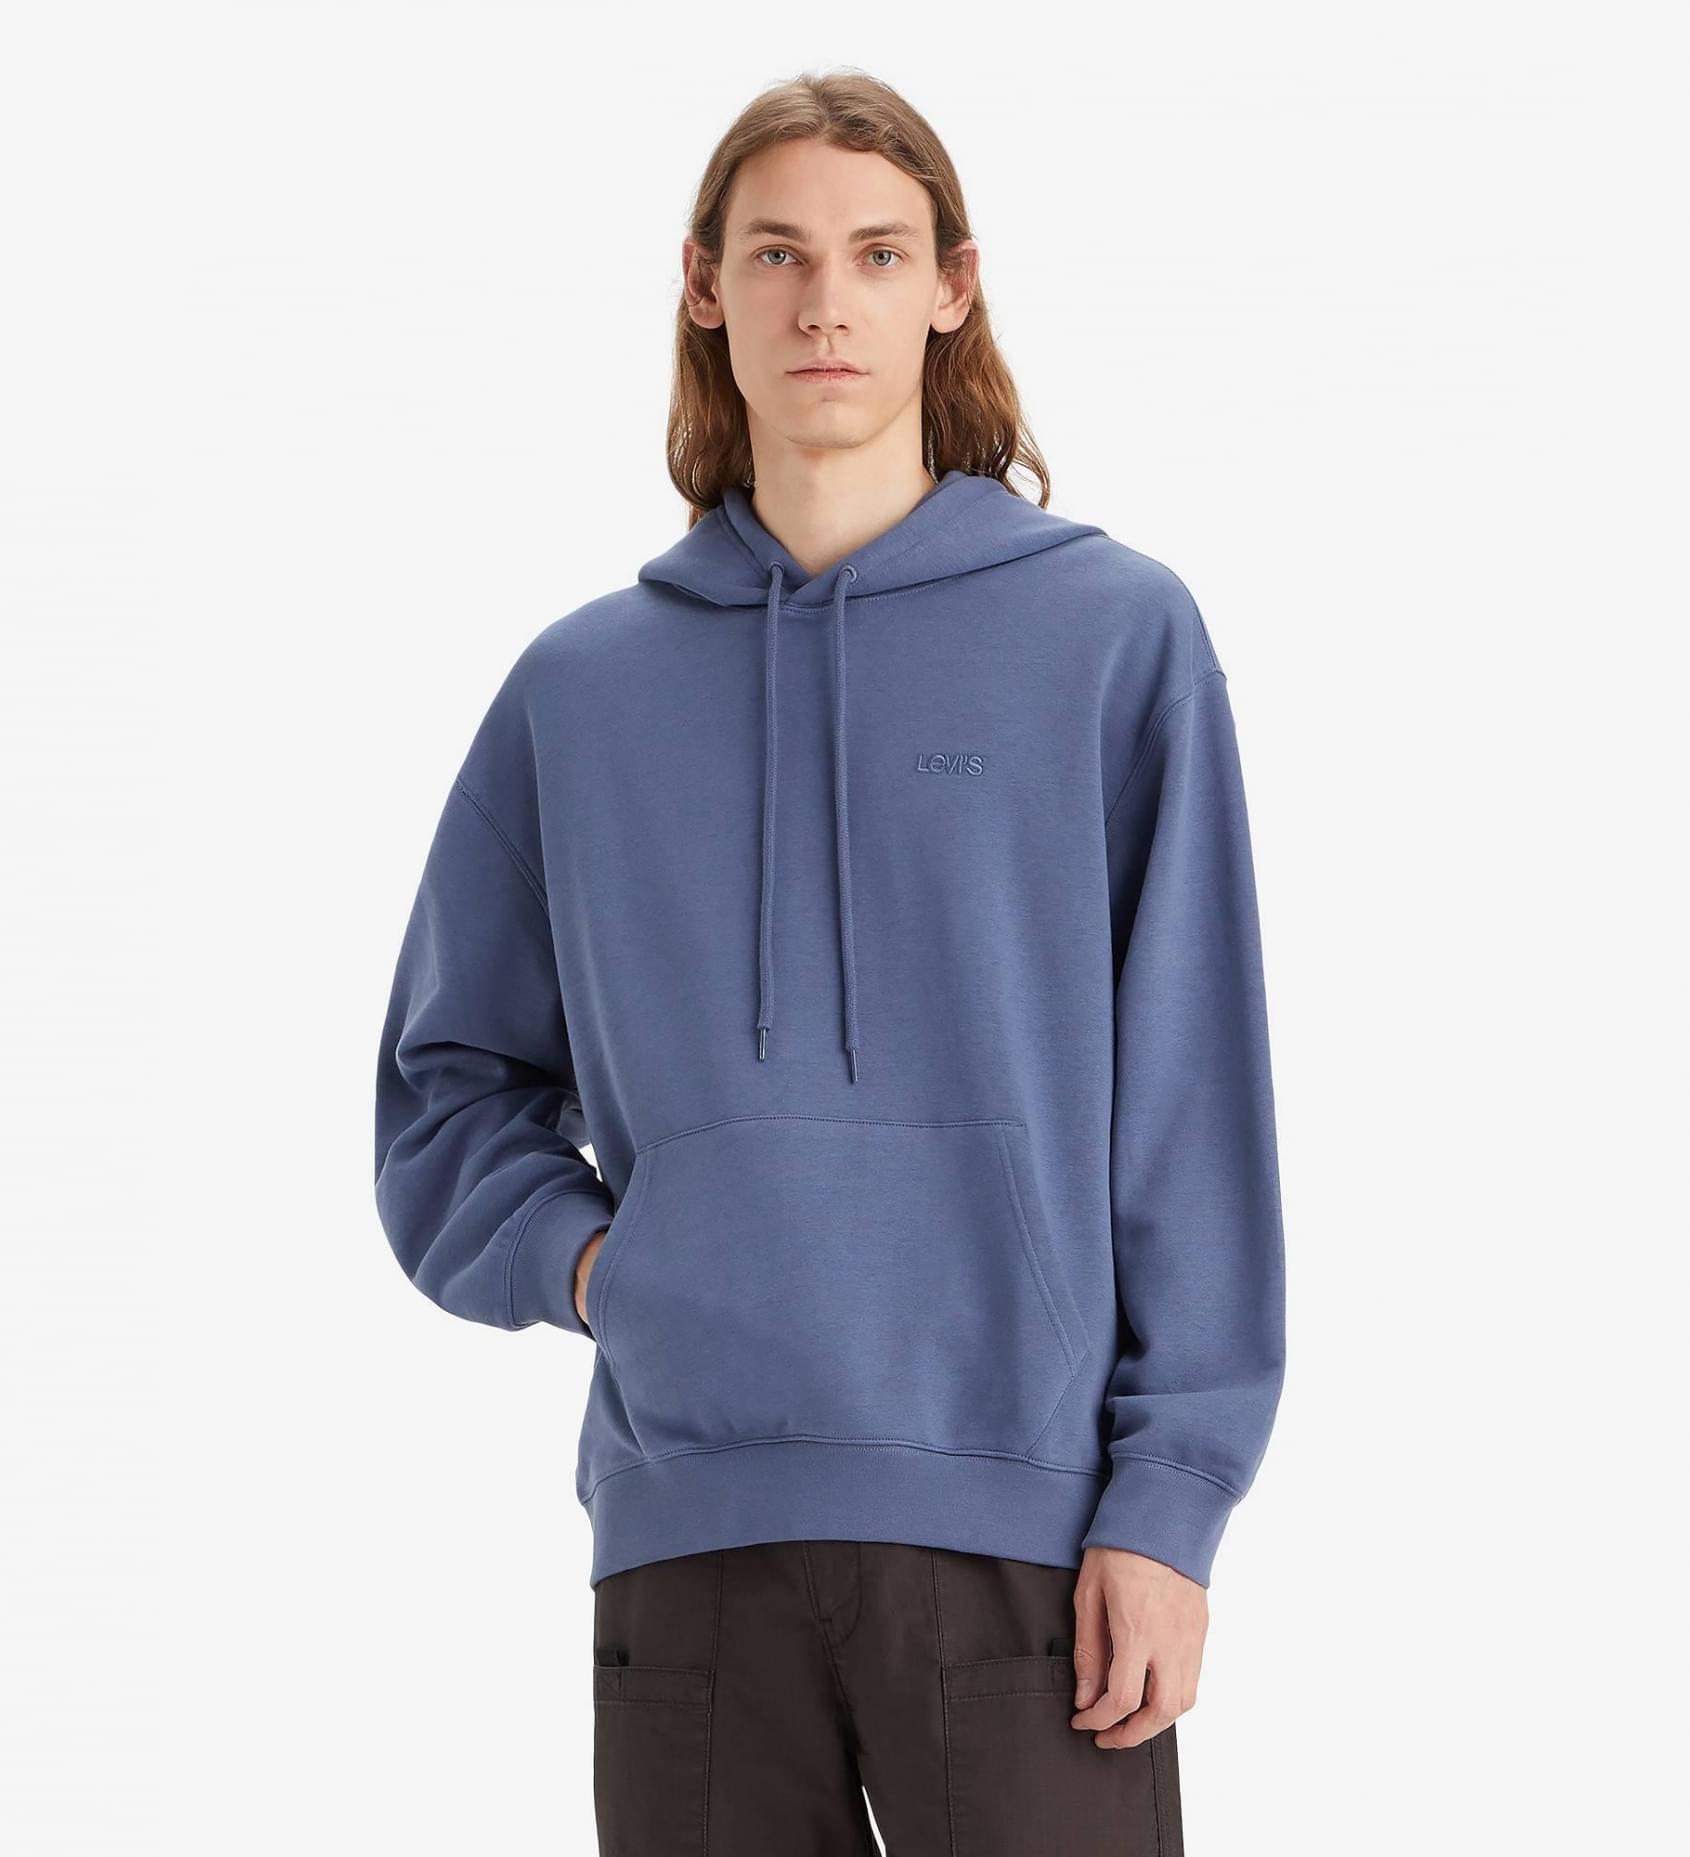 Sweats Hoodie - Levi's Jeans, Jackets & Clothing